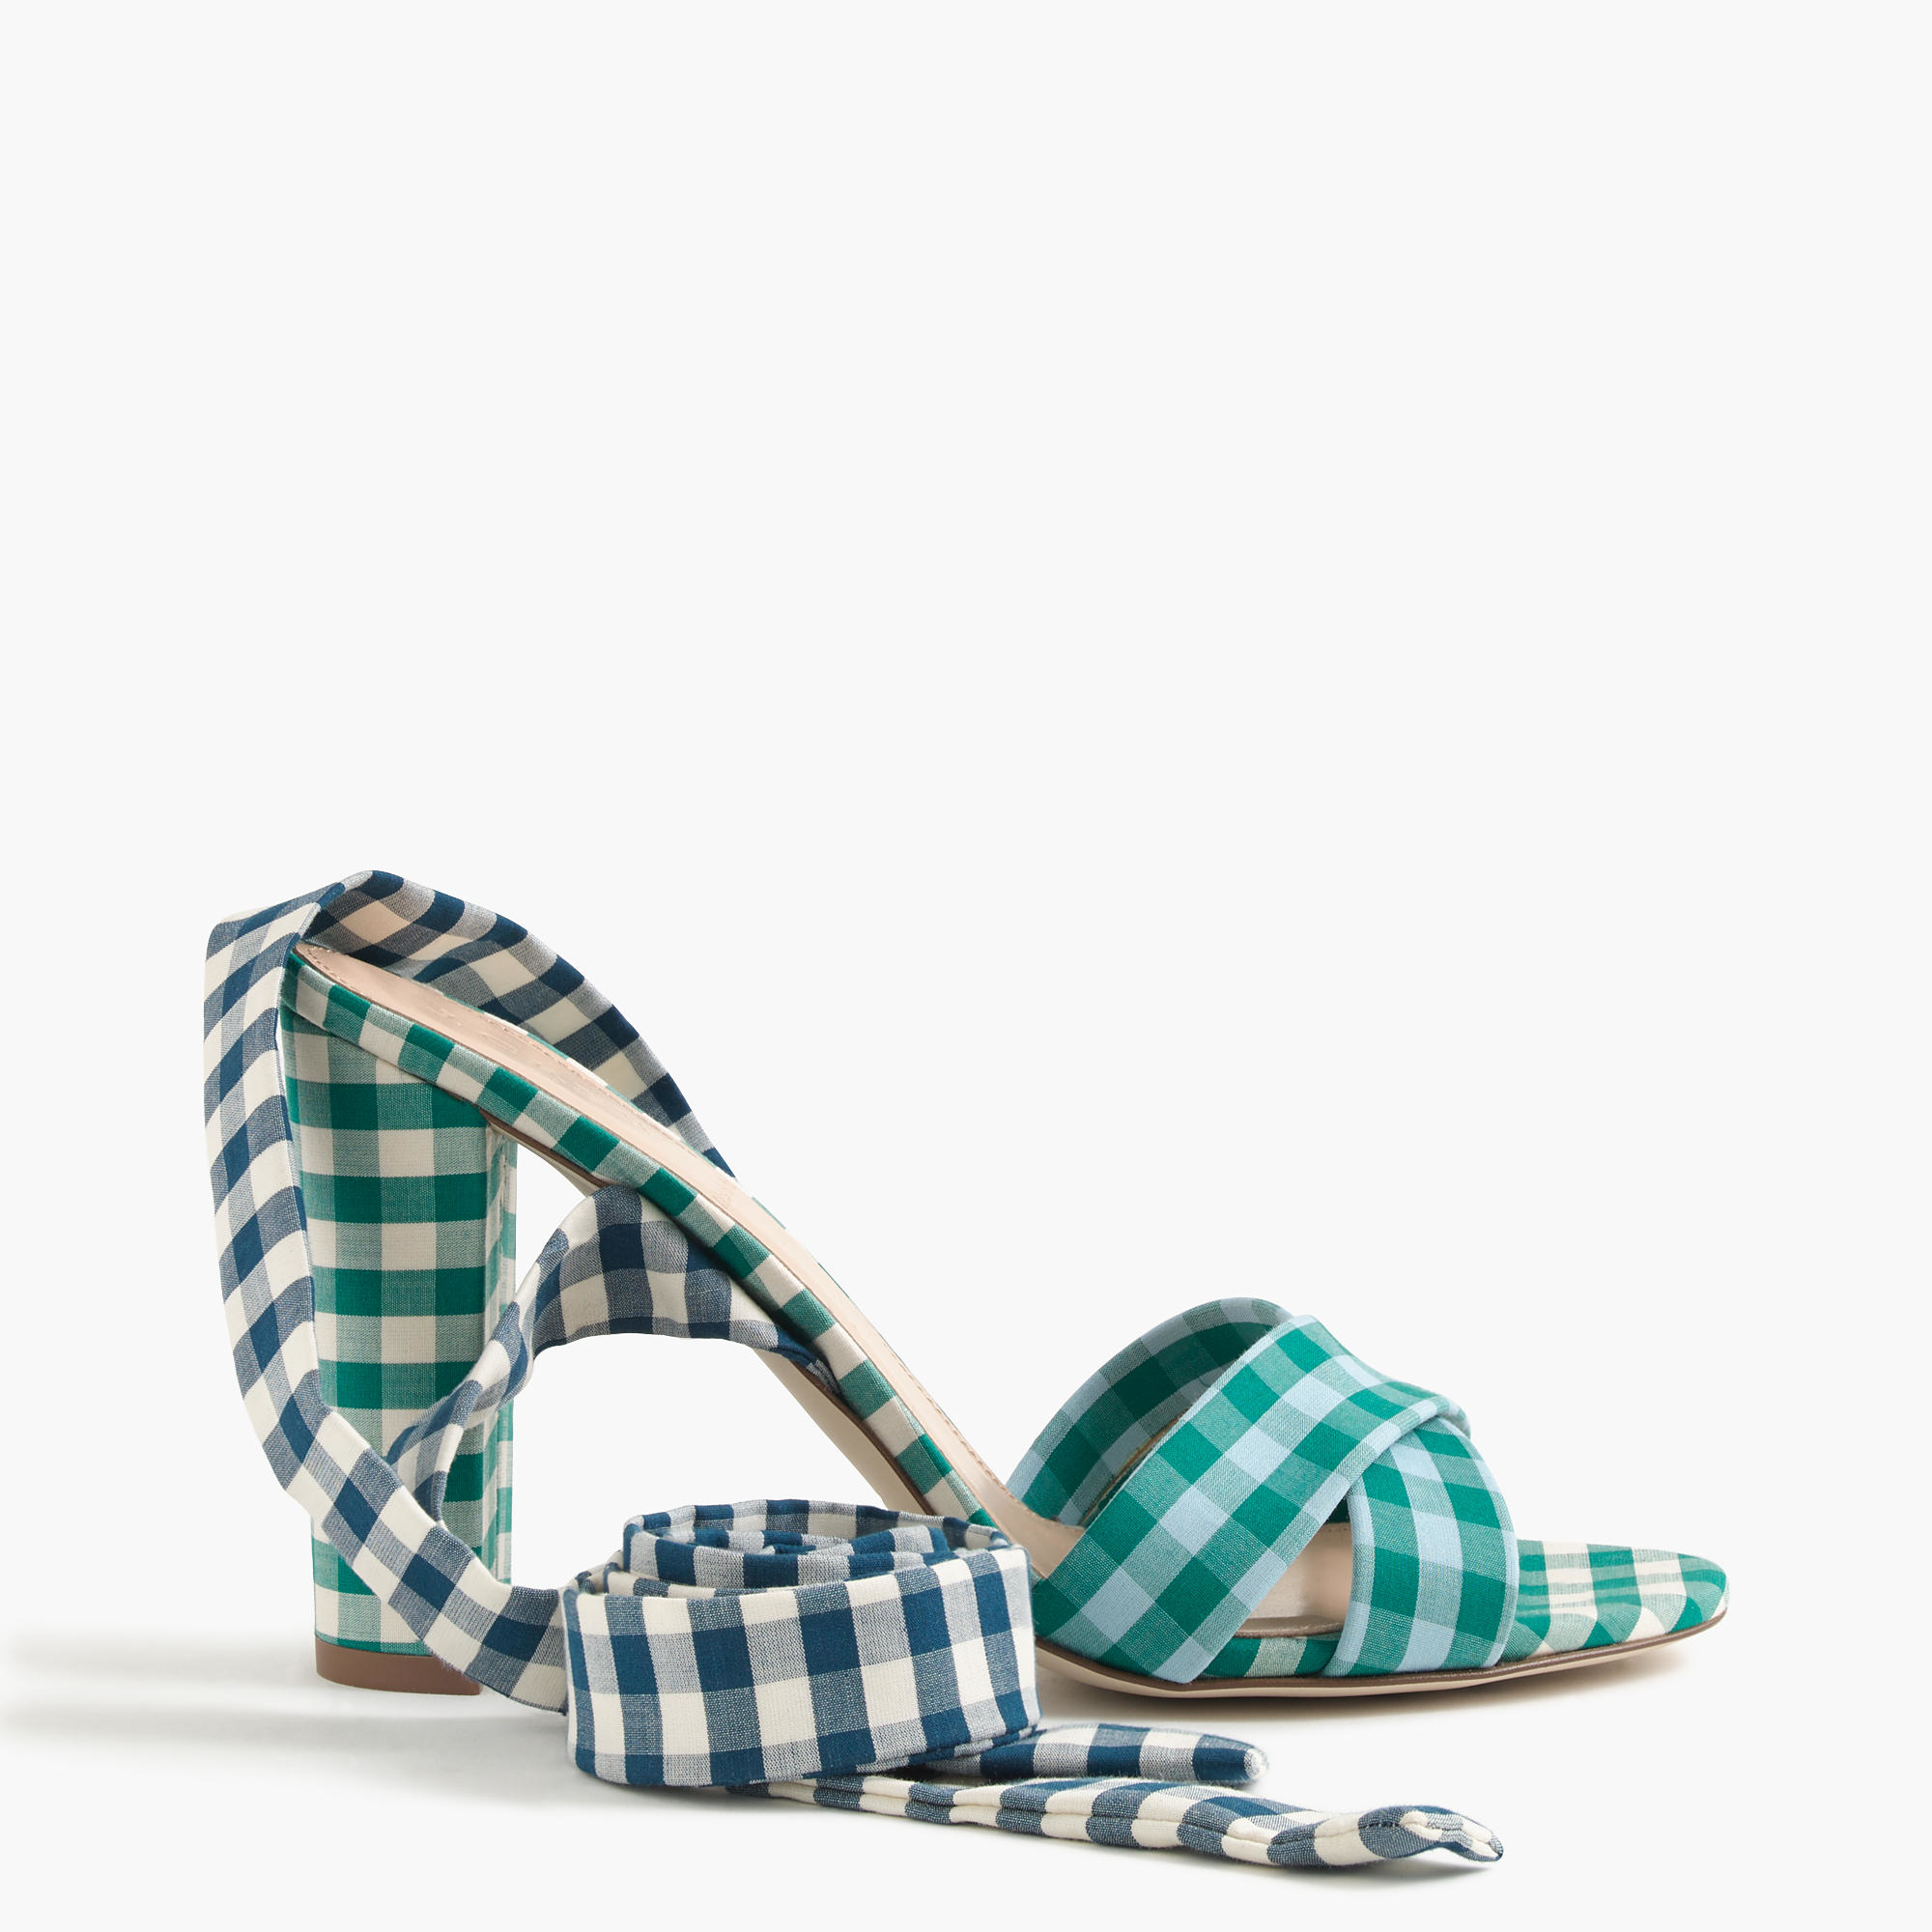 J.Crew Cotton Mixed Gingham Sandals With Ankle Wrap in Blue Emerald ...